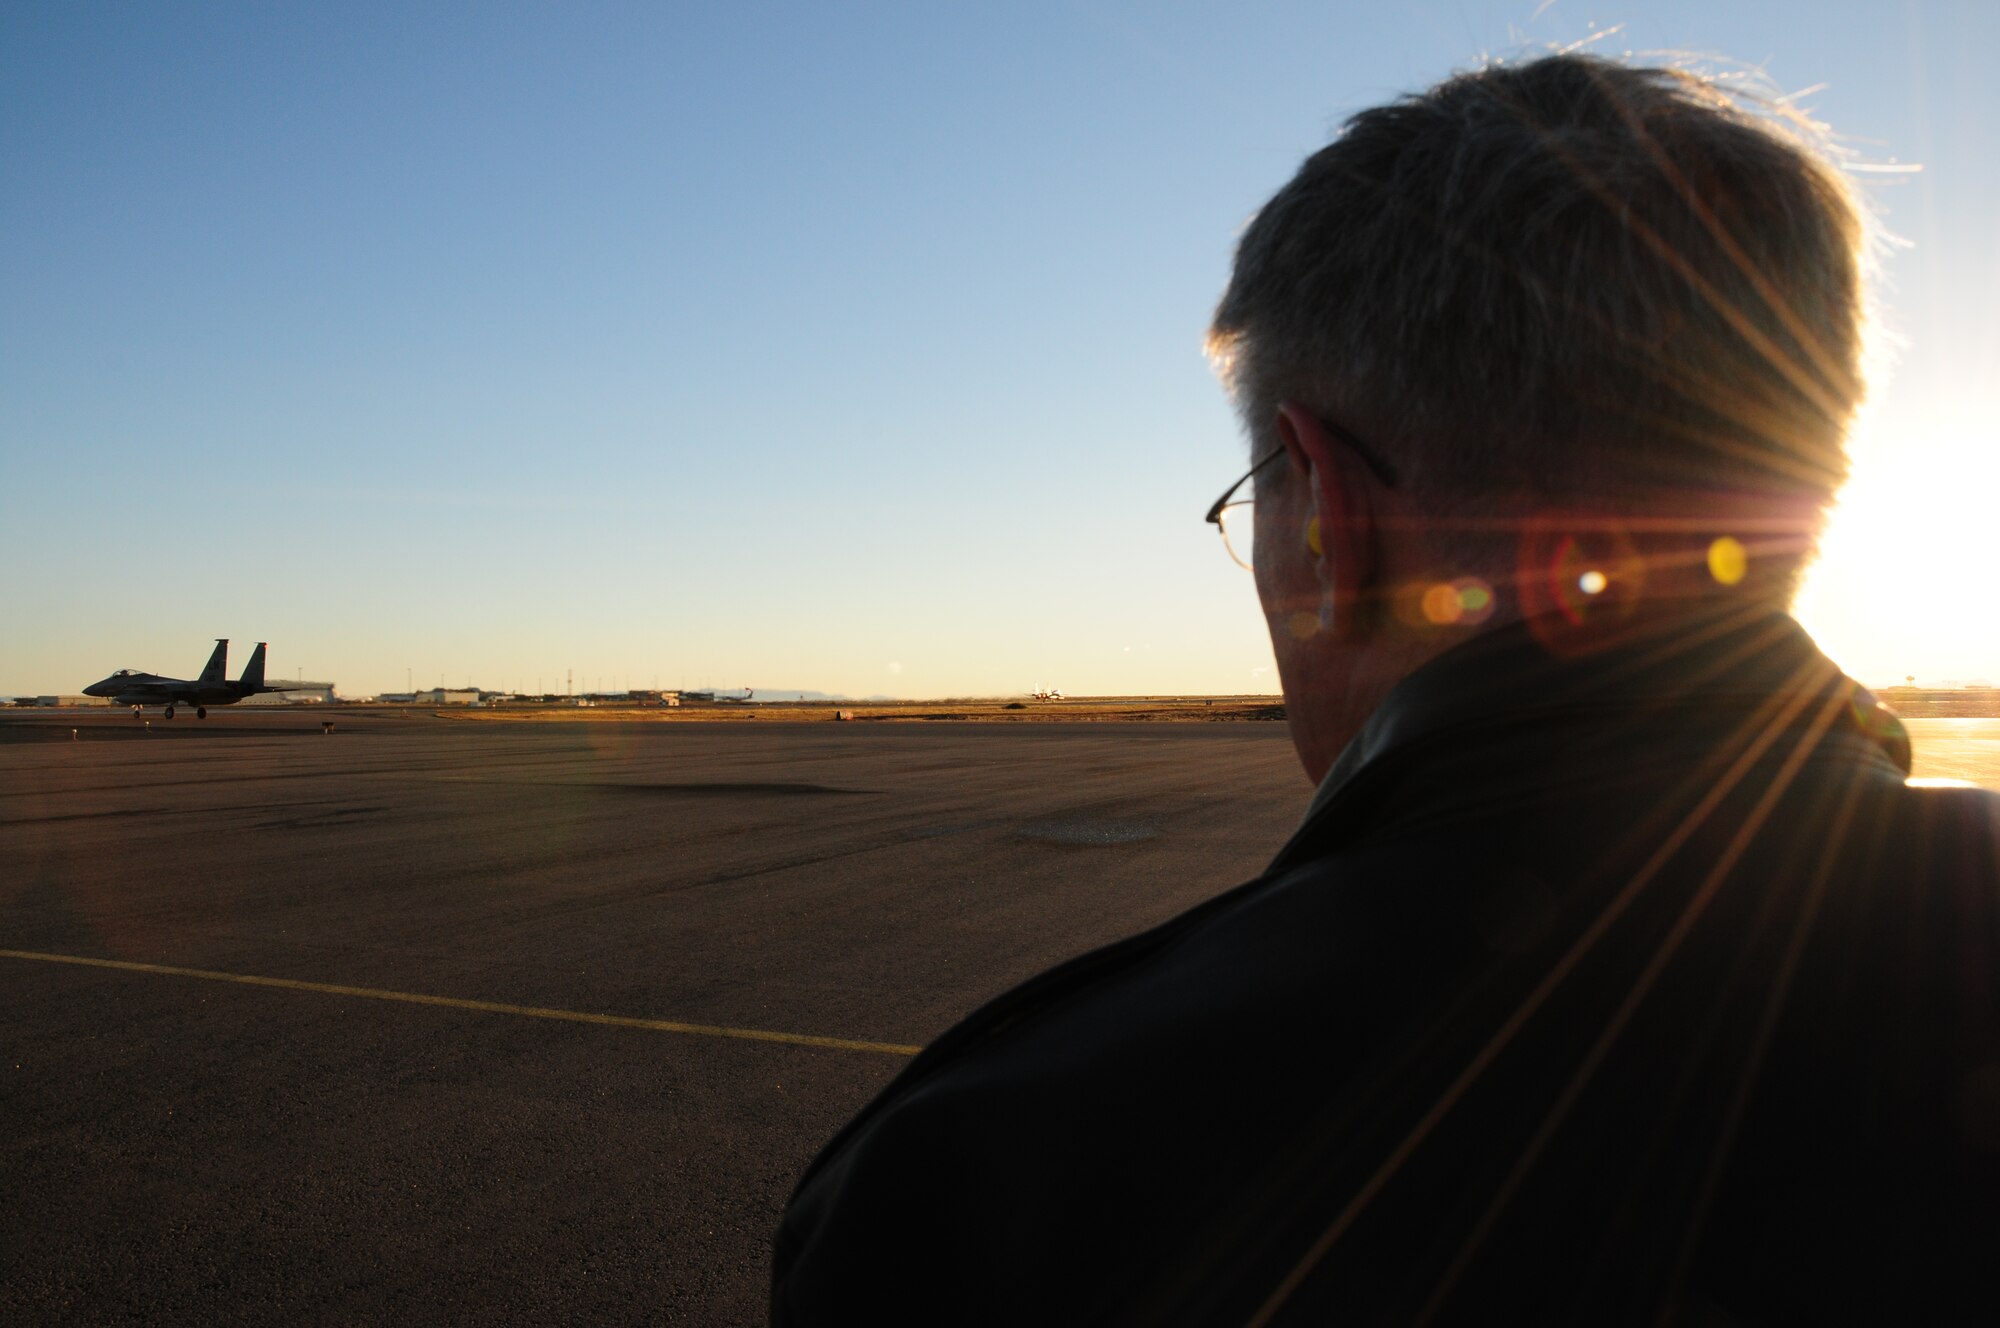 KEFLAVIK, Iceland – Gen. Roger A. Brady, U.S. Air Forces in Europe commander, watches as an F-15C Eagle taxis before takeoff during his visit to the 493rd Expeditionary Fighter Squadron here Sept. 22. The F-15 Eagles are deployed from the 48th Fighter Wing at RAF Lakenheath, United Kingdom, along with a KC-135 Stratotanker from the 100th Air Refueling Wing at RAF Mildenhall, UK, supporting NATO’s Icelandic Air Policing mission. (U.S. Air Force photo/Senior Airman Stephen Linch)